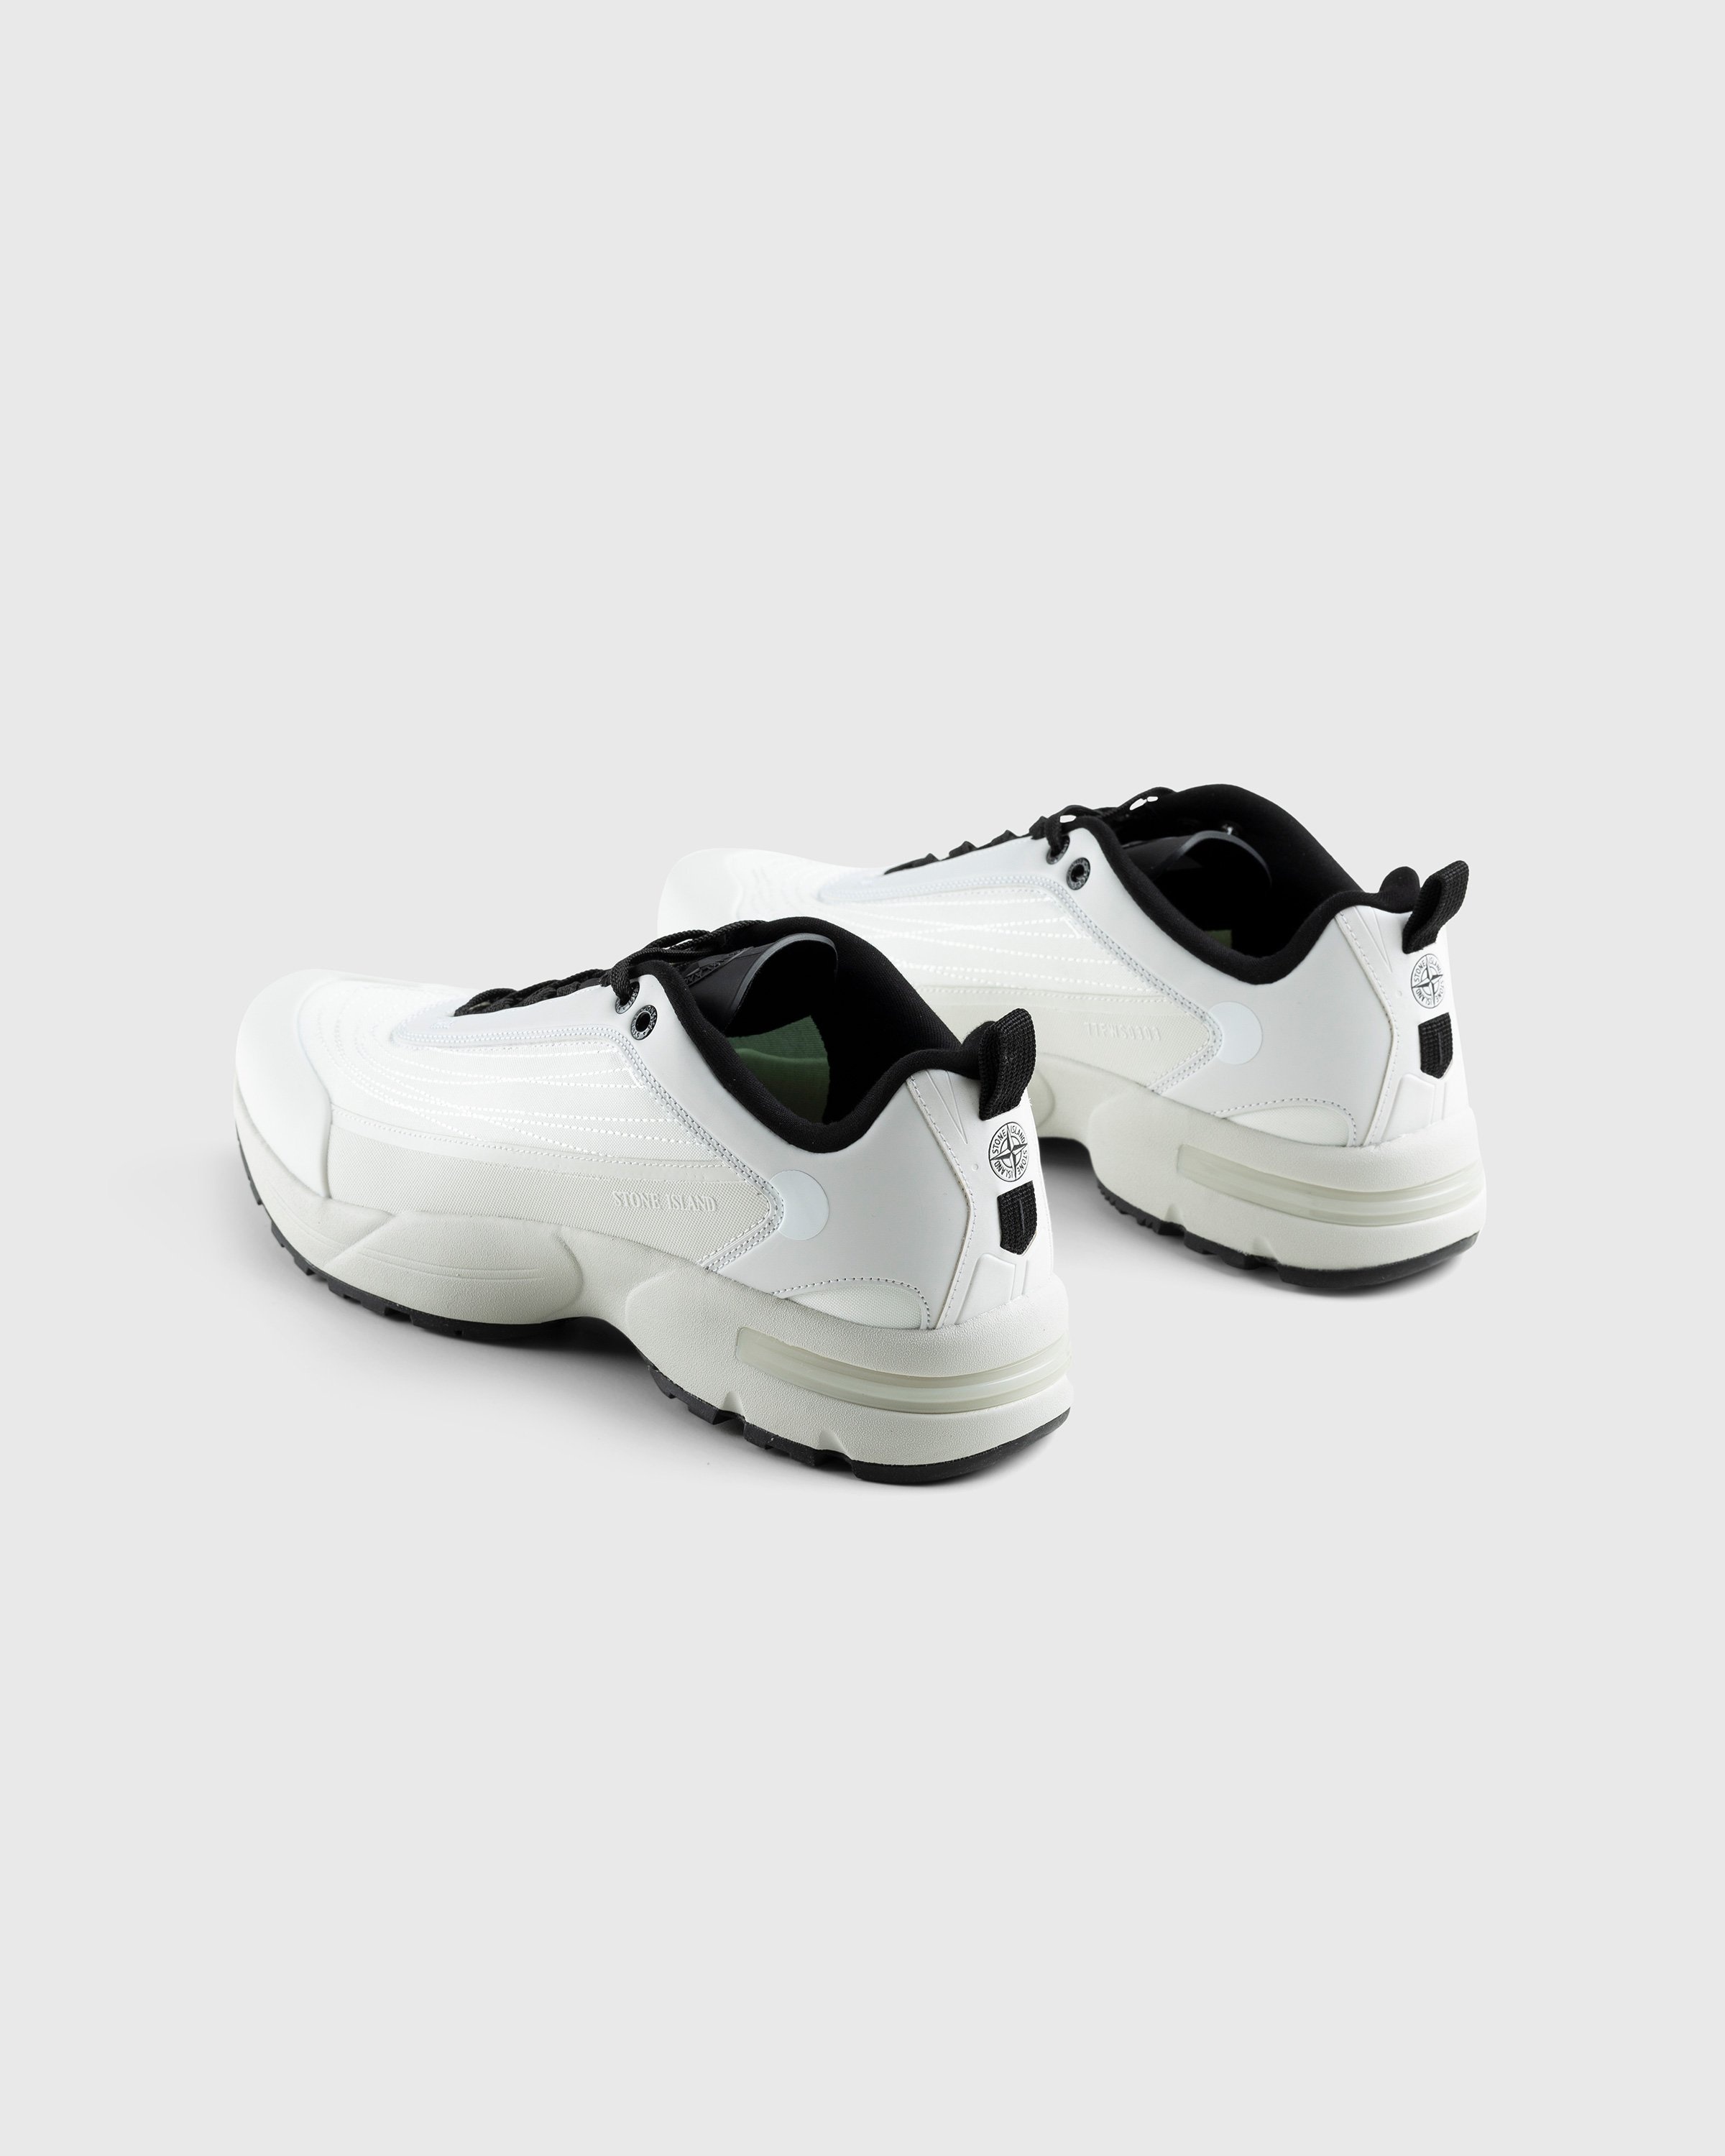 Stone Island – Grime Sneaker White - Low Top Sneakers - White - Image 4